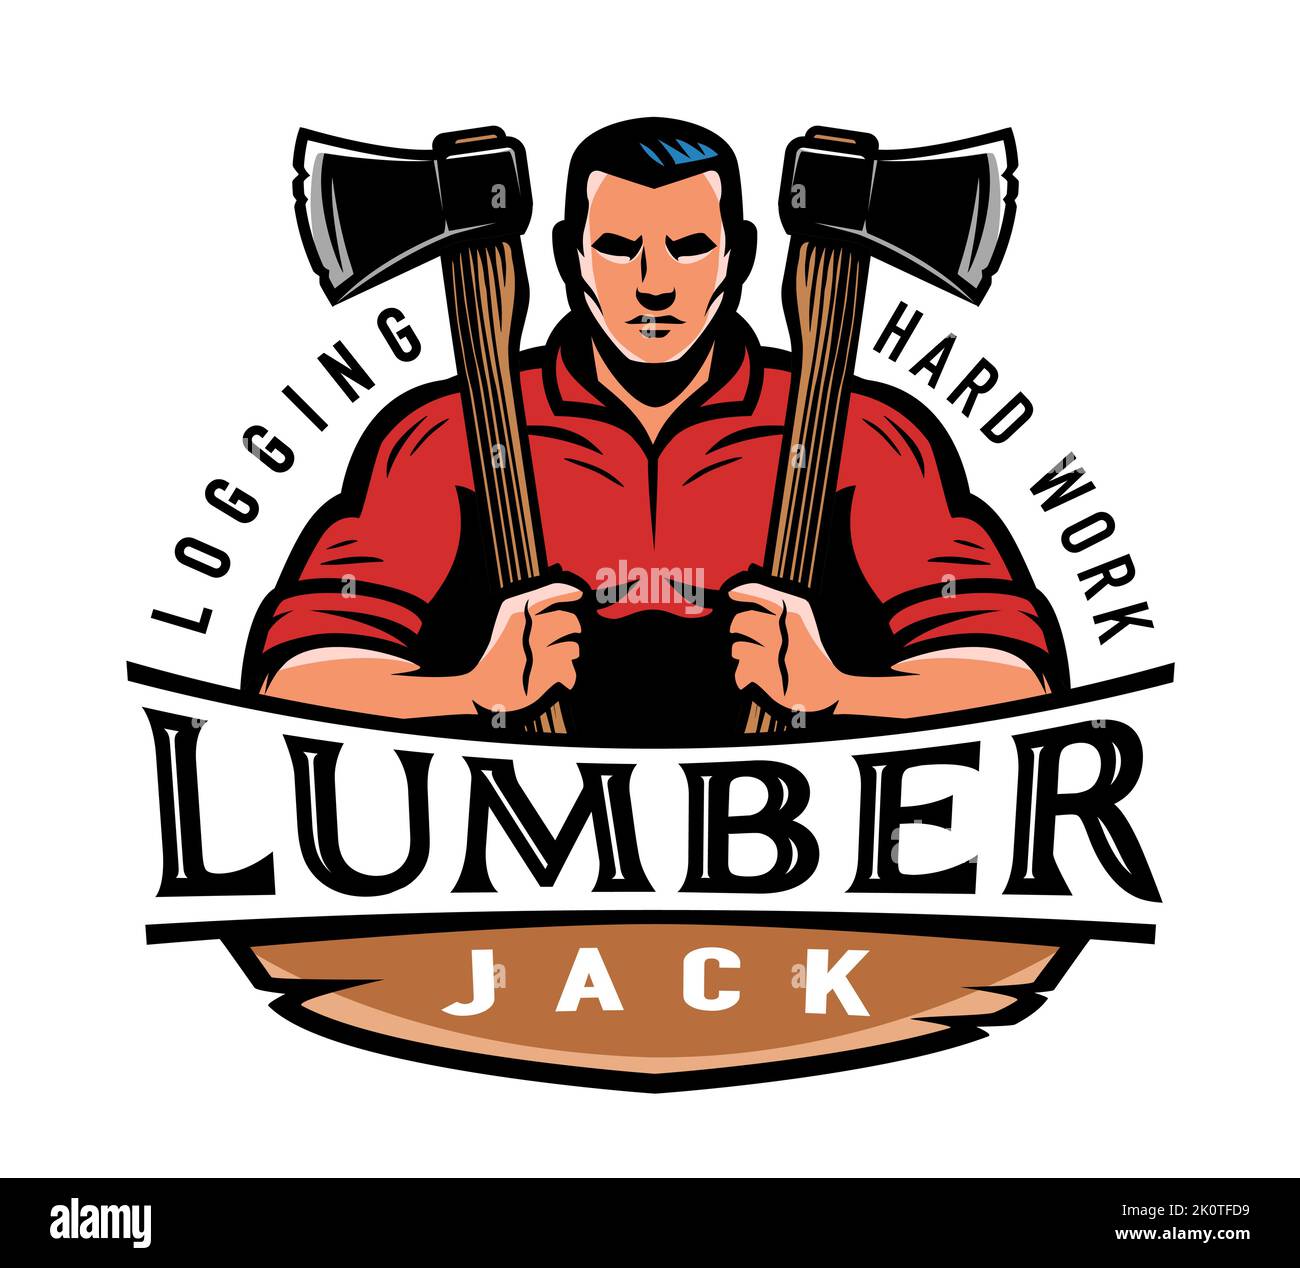 Lumberjack with axe design logo. Wood industry, logging emblem and mascot. Woodwork, timber label vector illustration Stock Vector